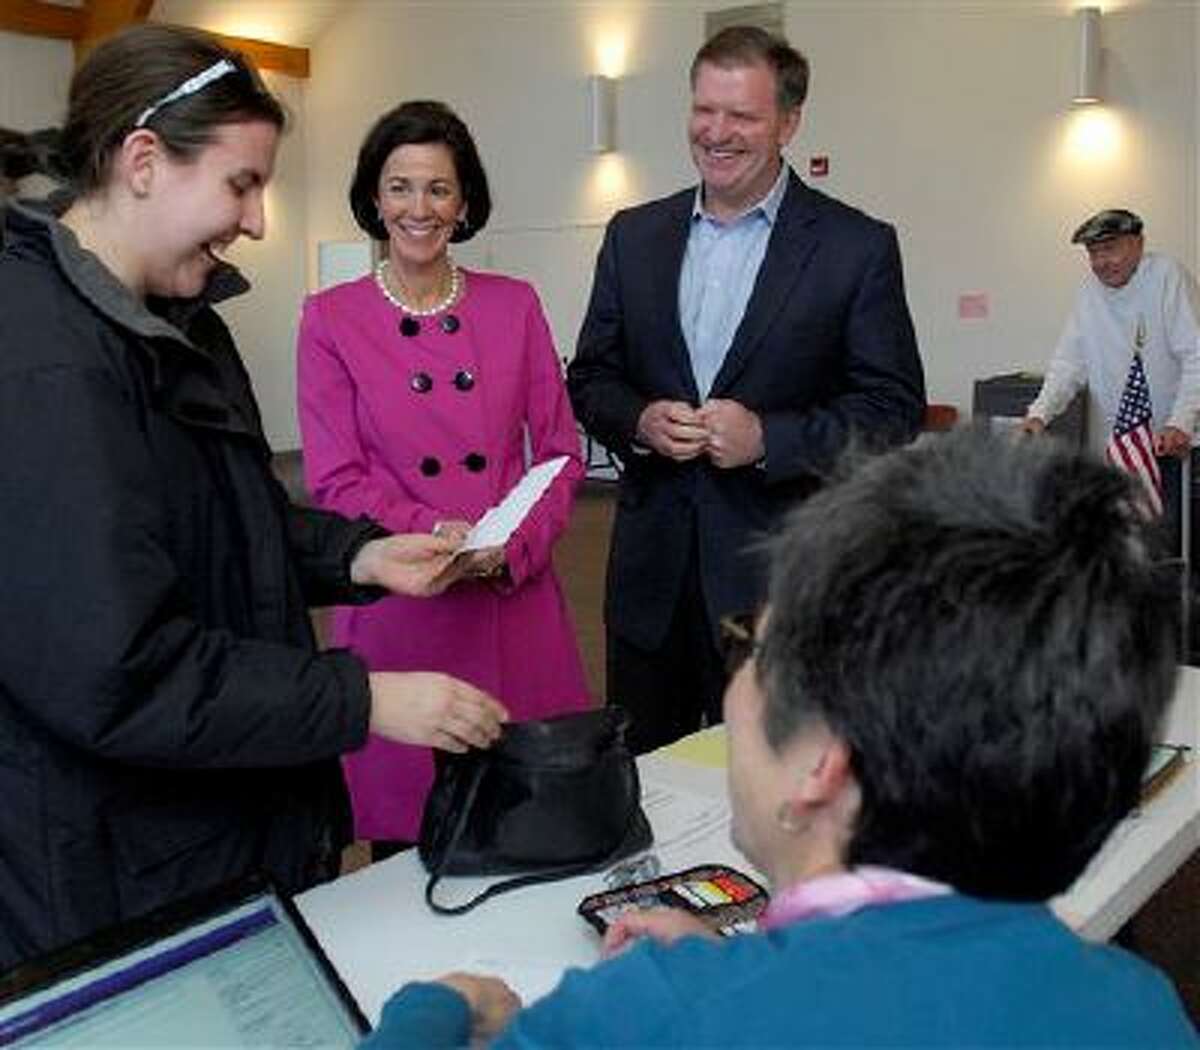 State Senator Bill Brady and his wife Nancy talk with fellow voter Katie Graehling of Bloomington while checking in with election judge Karen Fleming for their ballots as they prepare to vote in the 2014 primary election Tuesday. (AP Photo/The Pantagraph, Lori Ann Cook-Neisler)